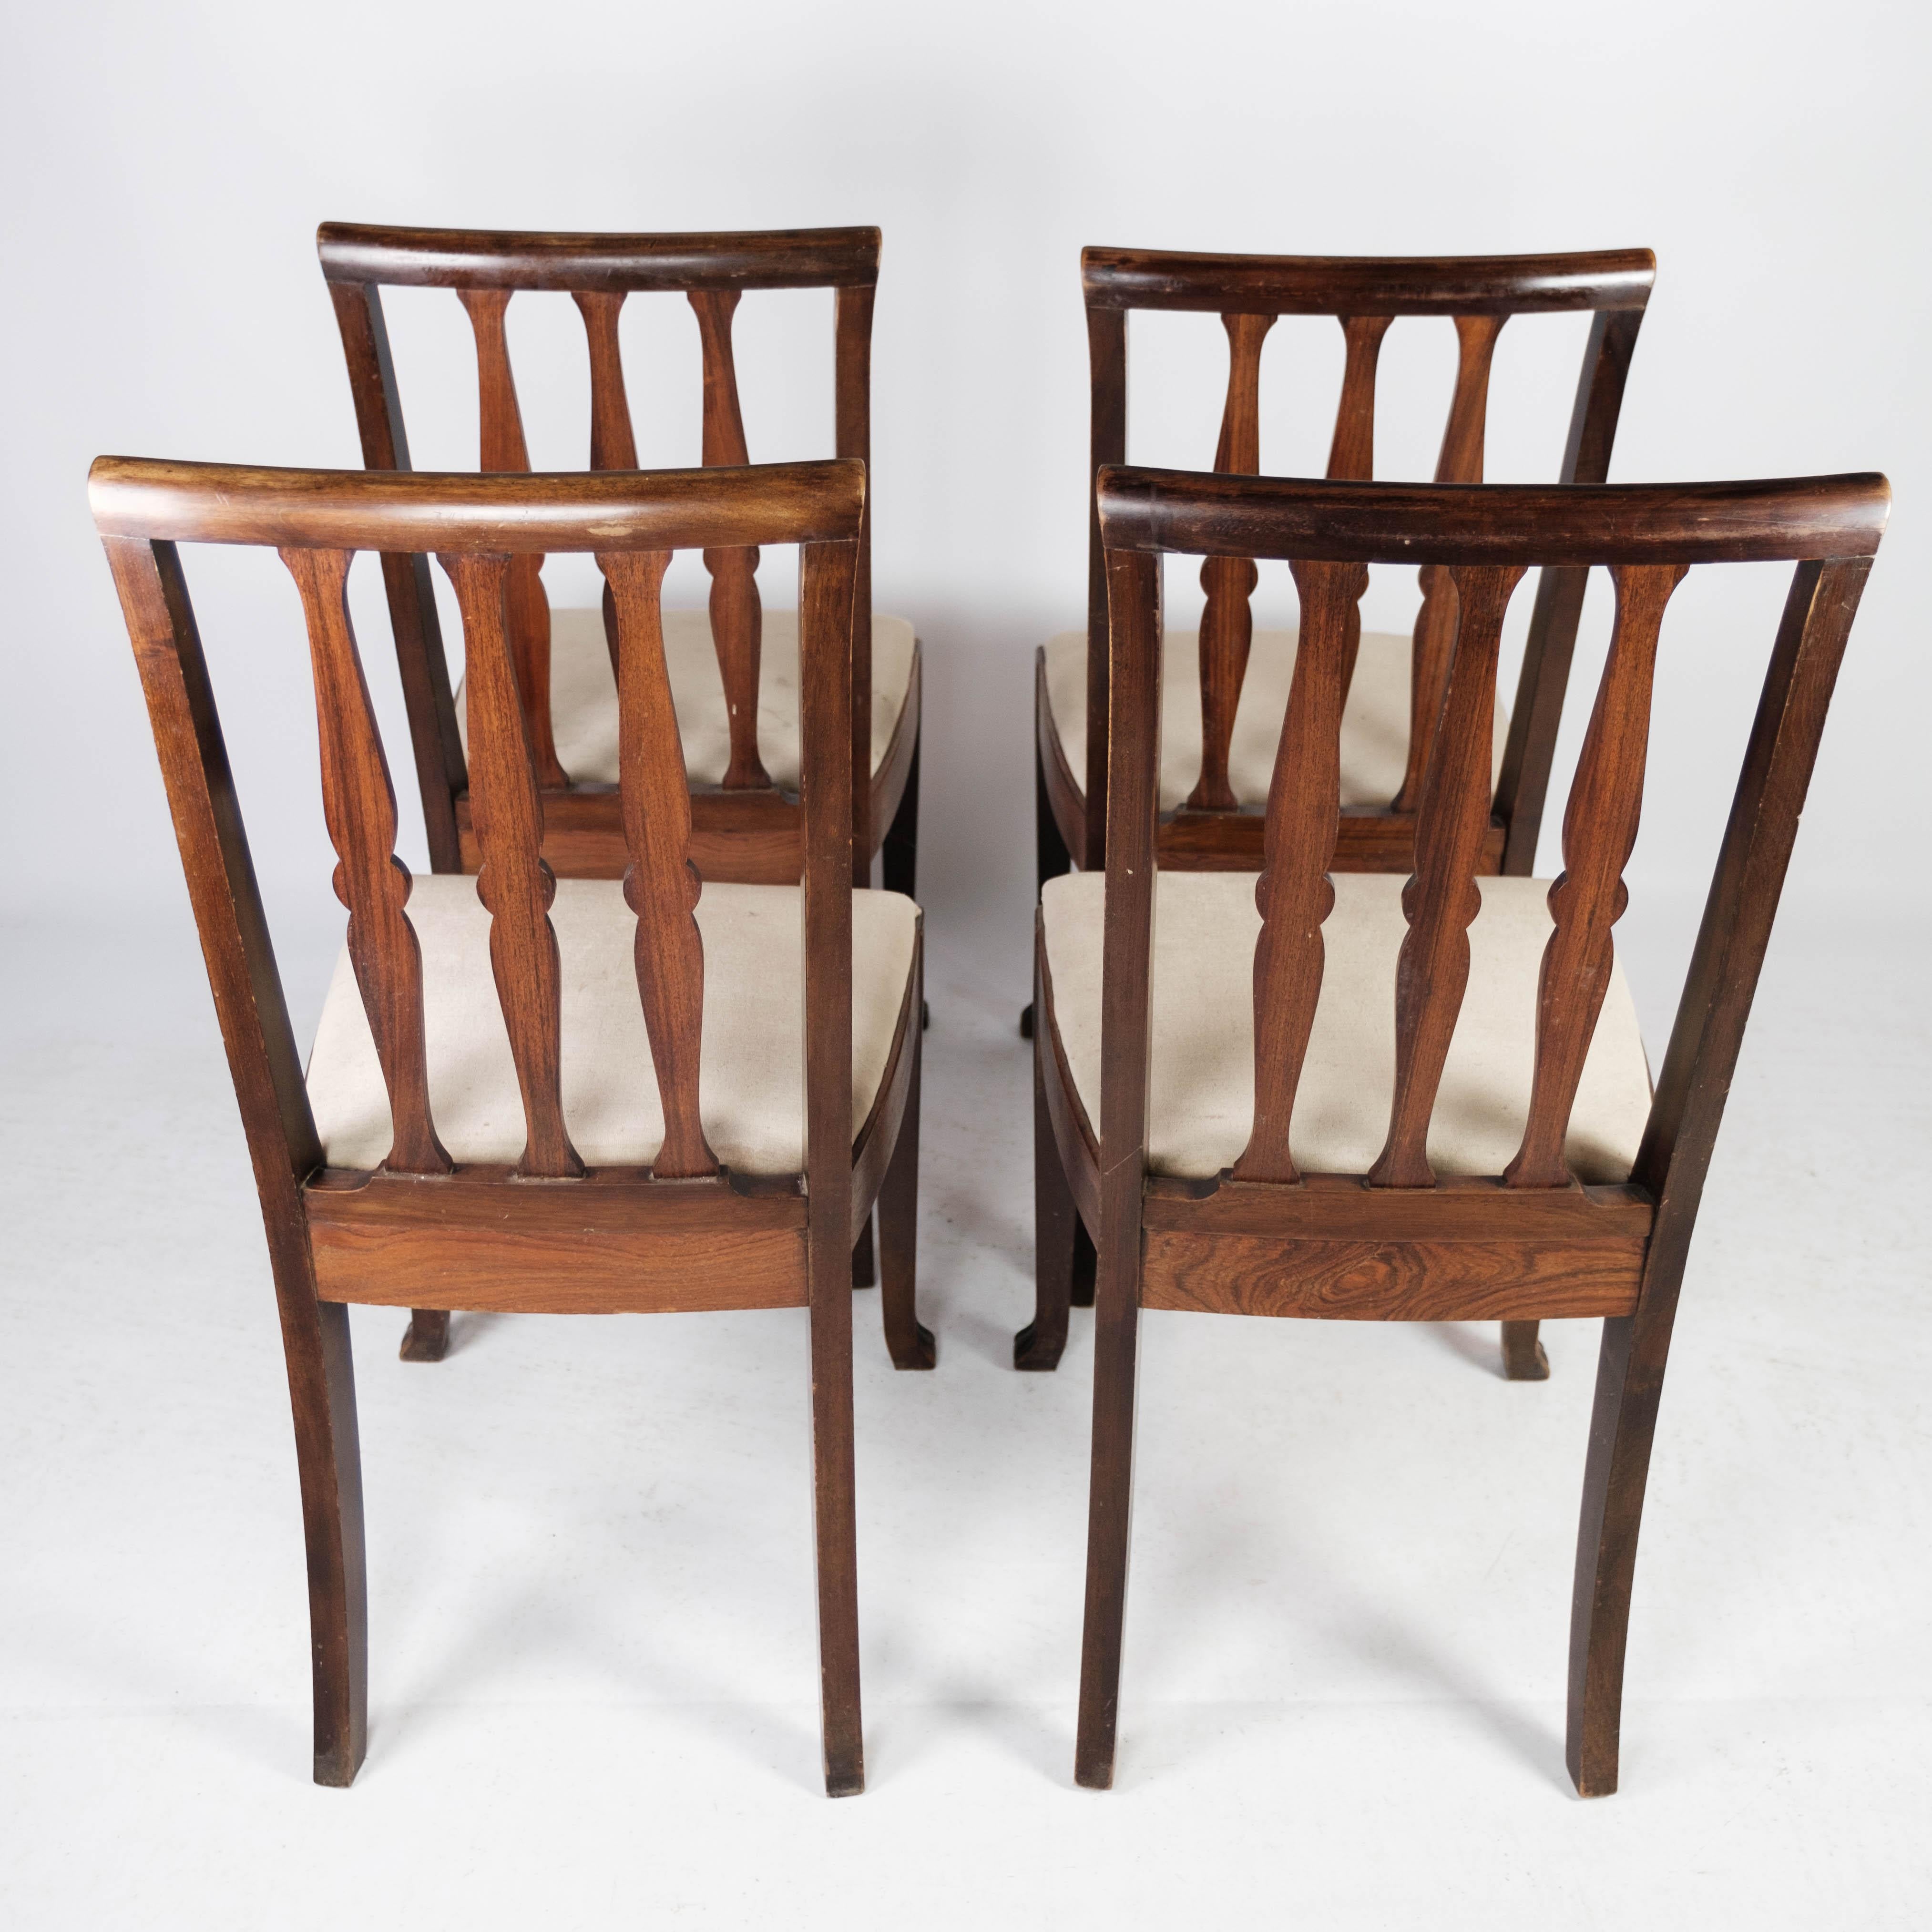 Danish Set of Four Dining Room Chairs in Rosewood, 1920s For Sale